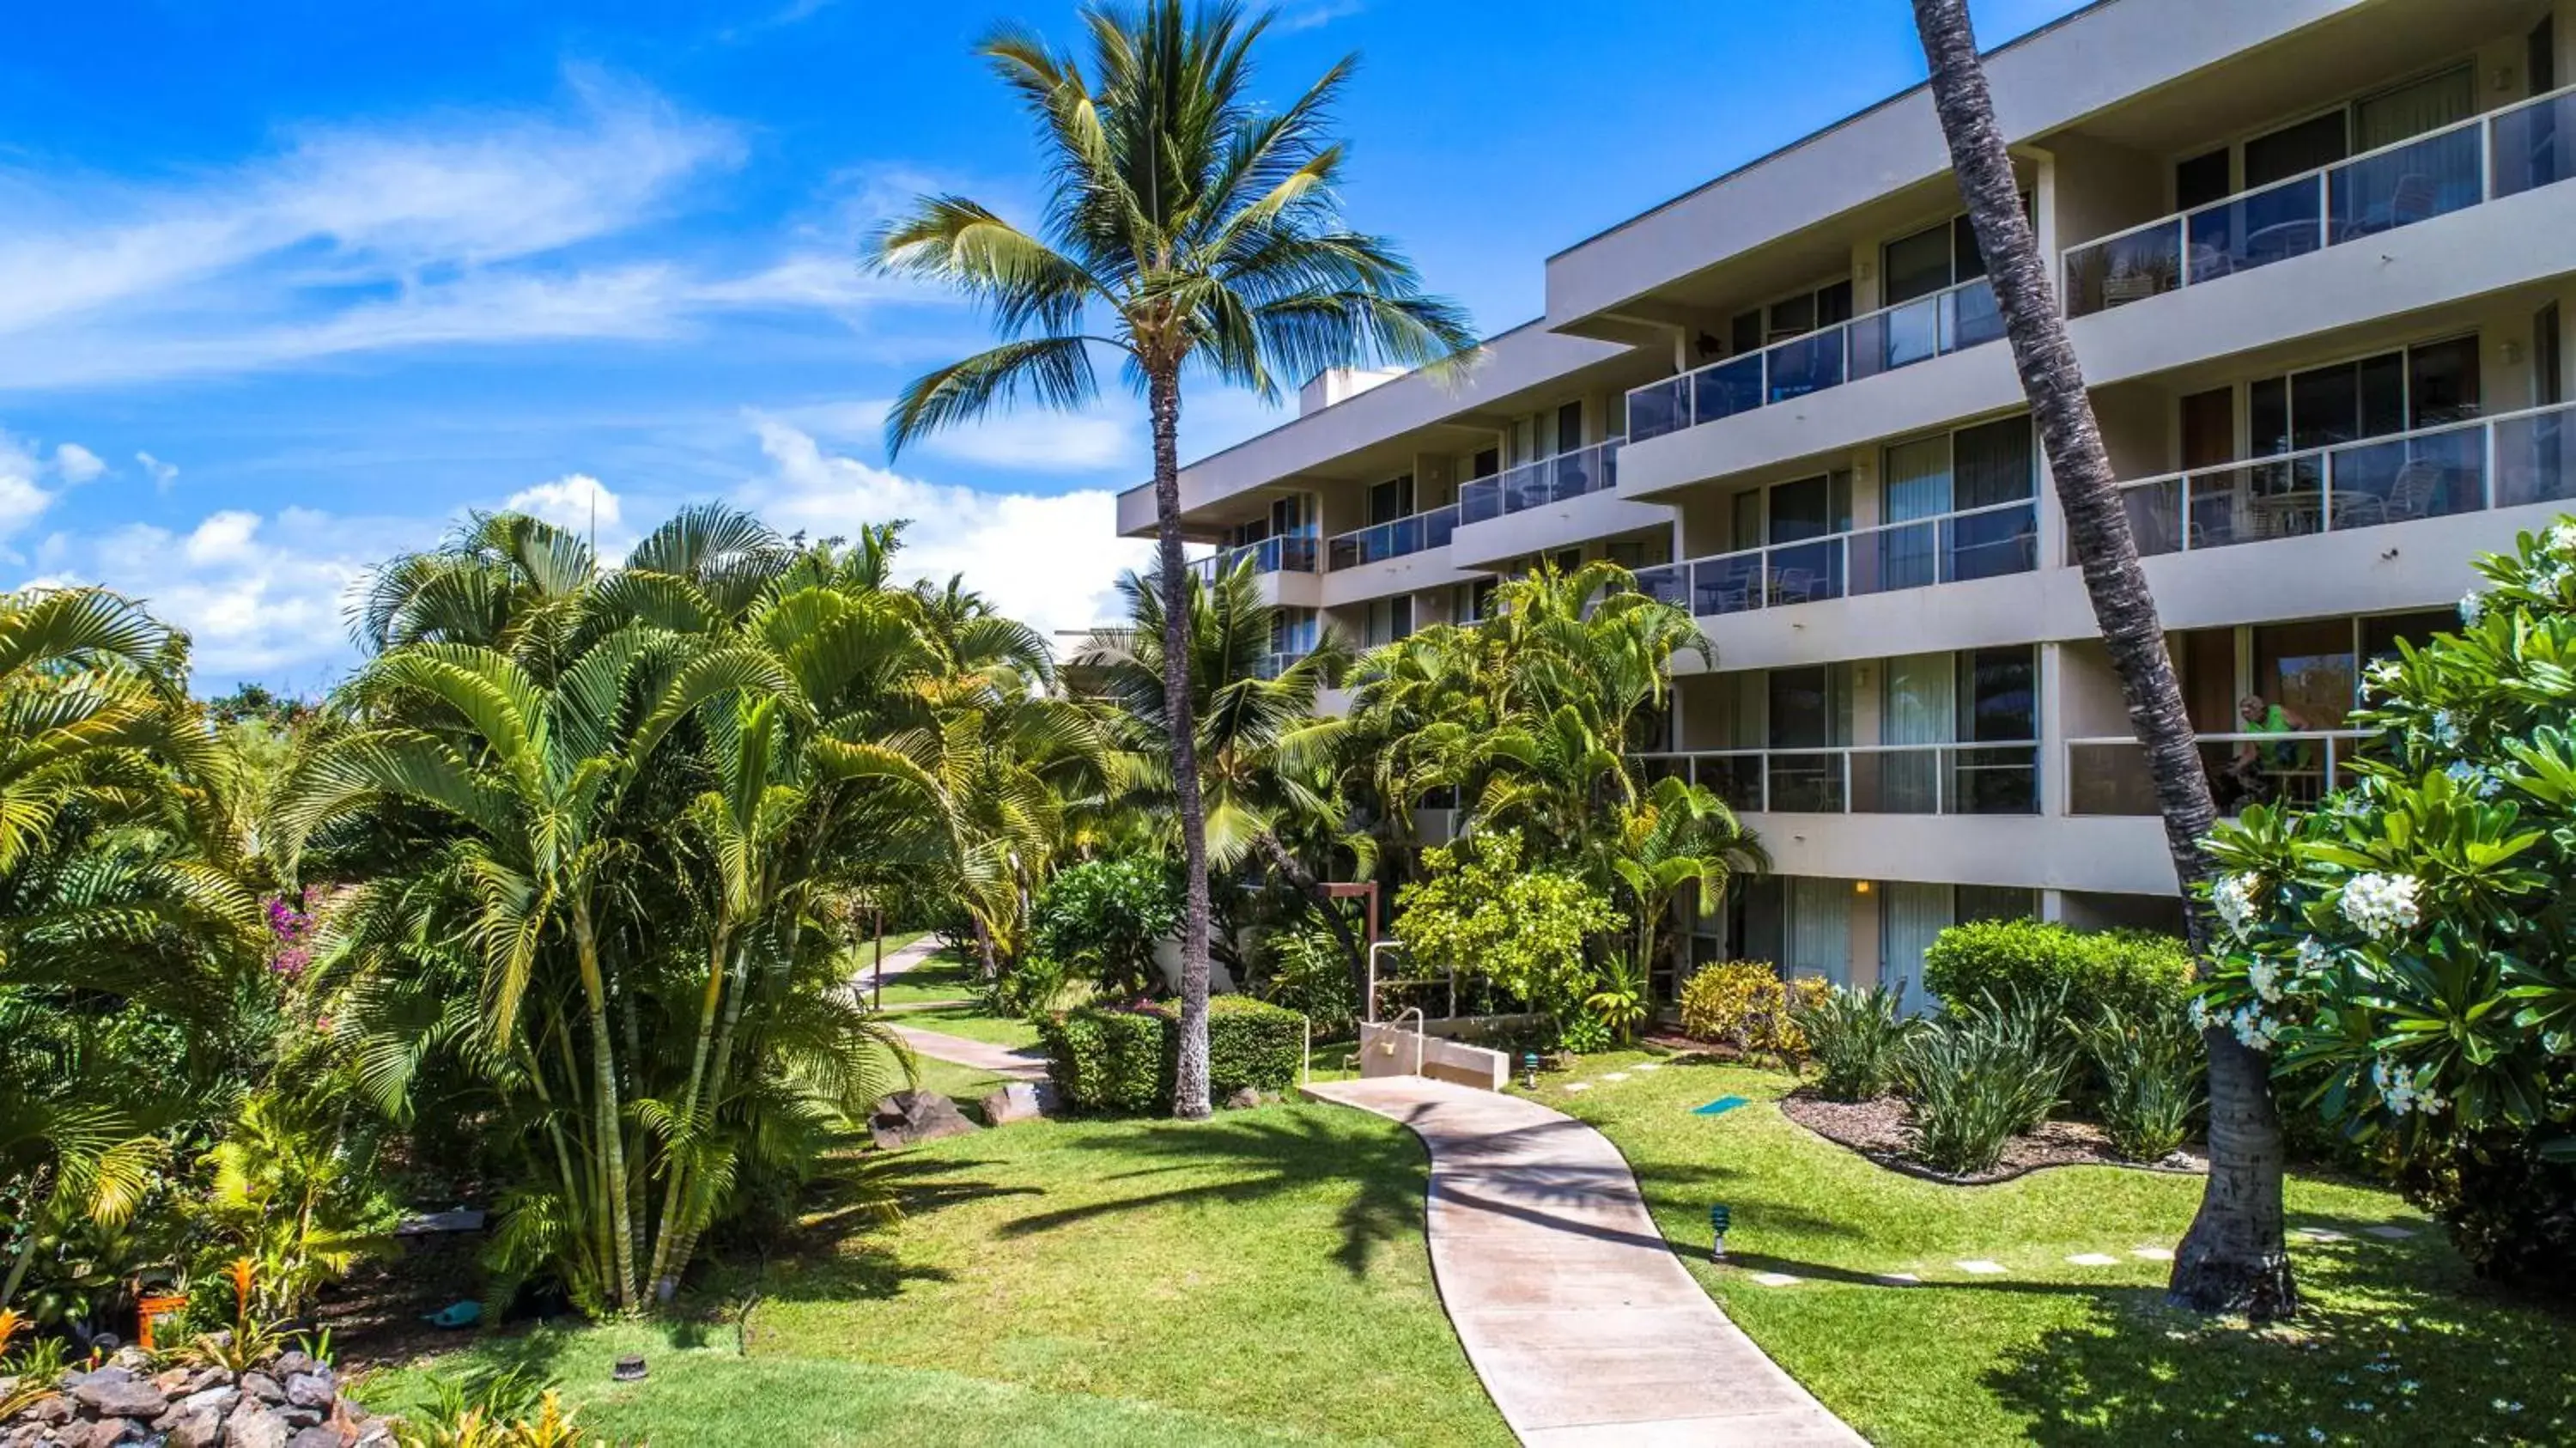 Property Building in Aston at the Maui Banyan